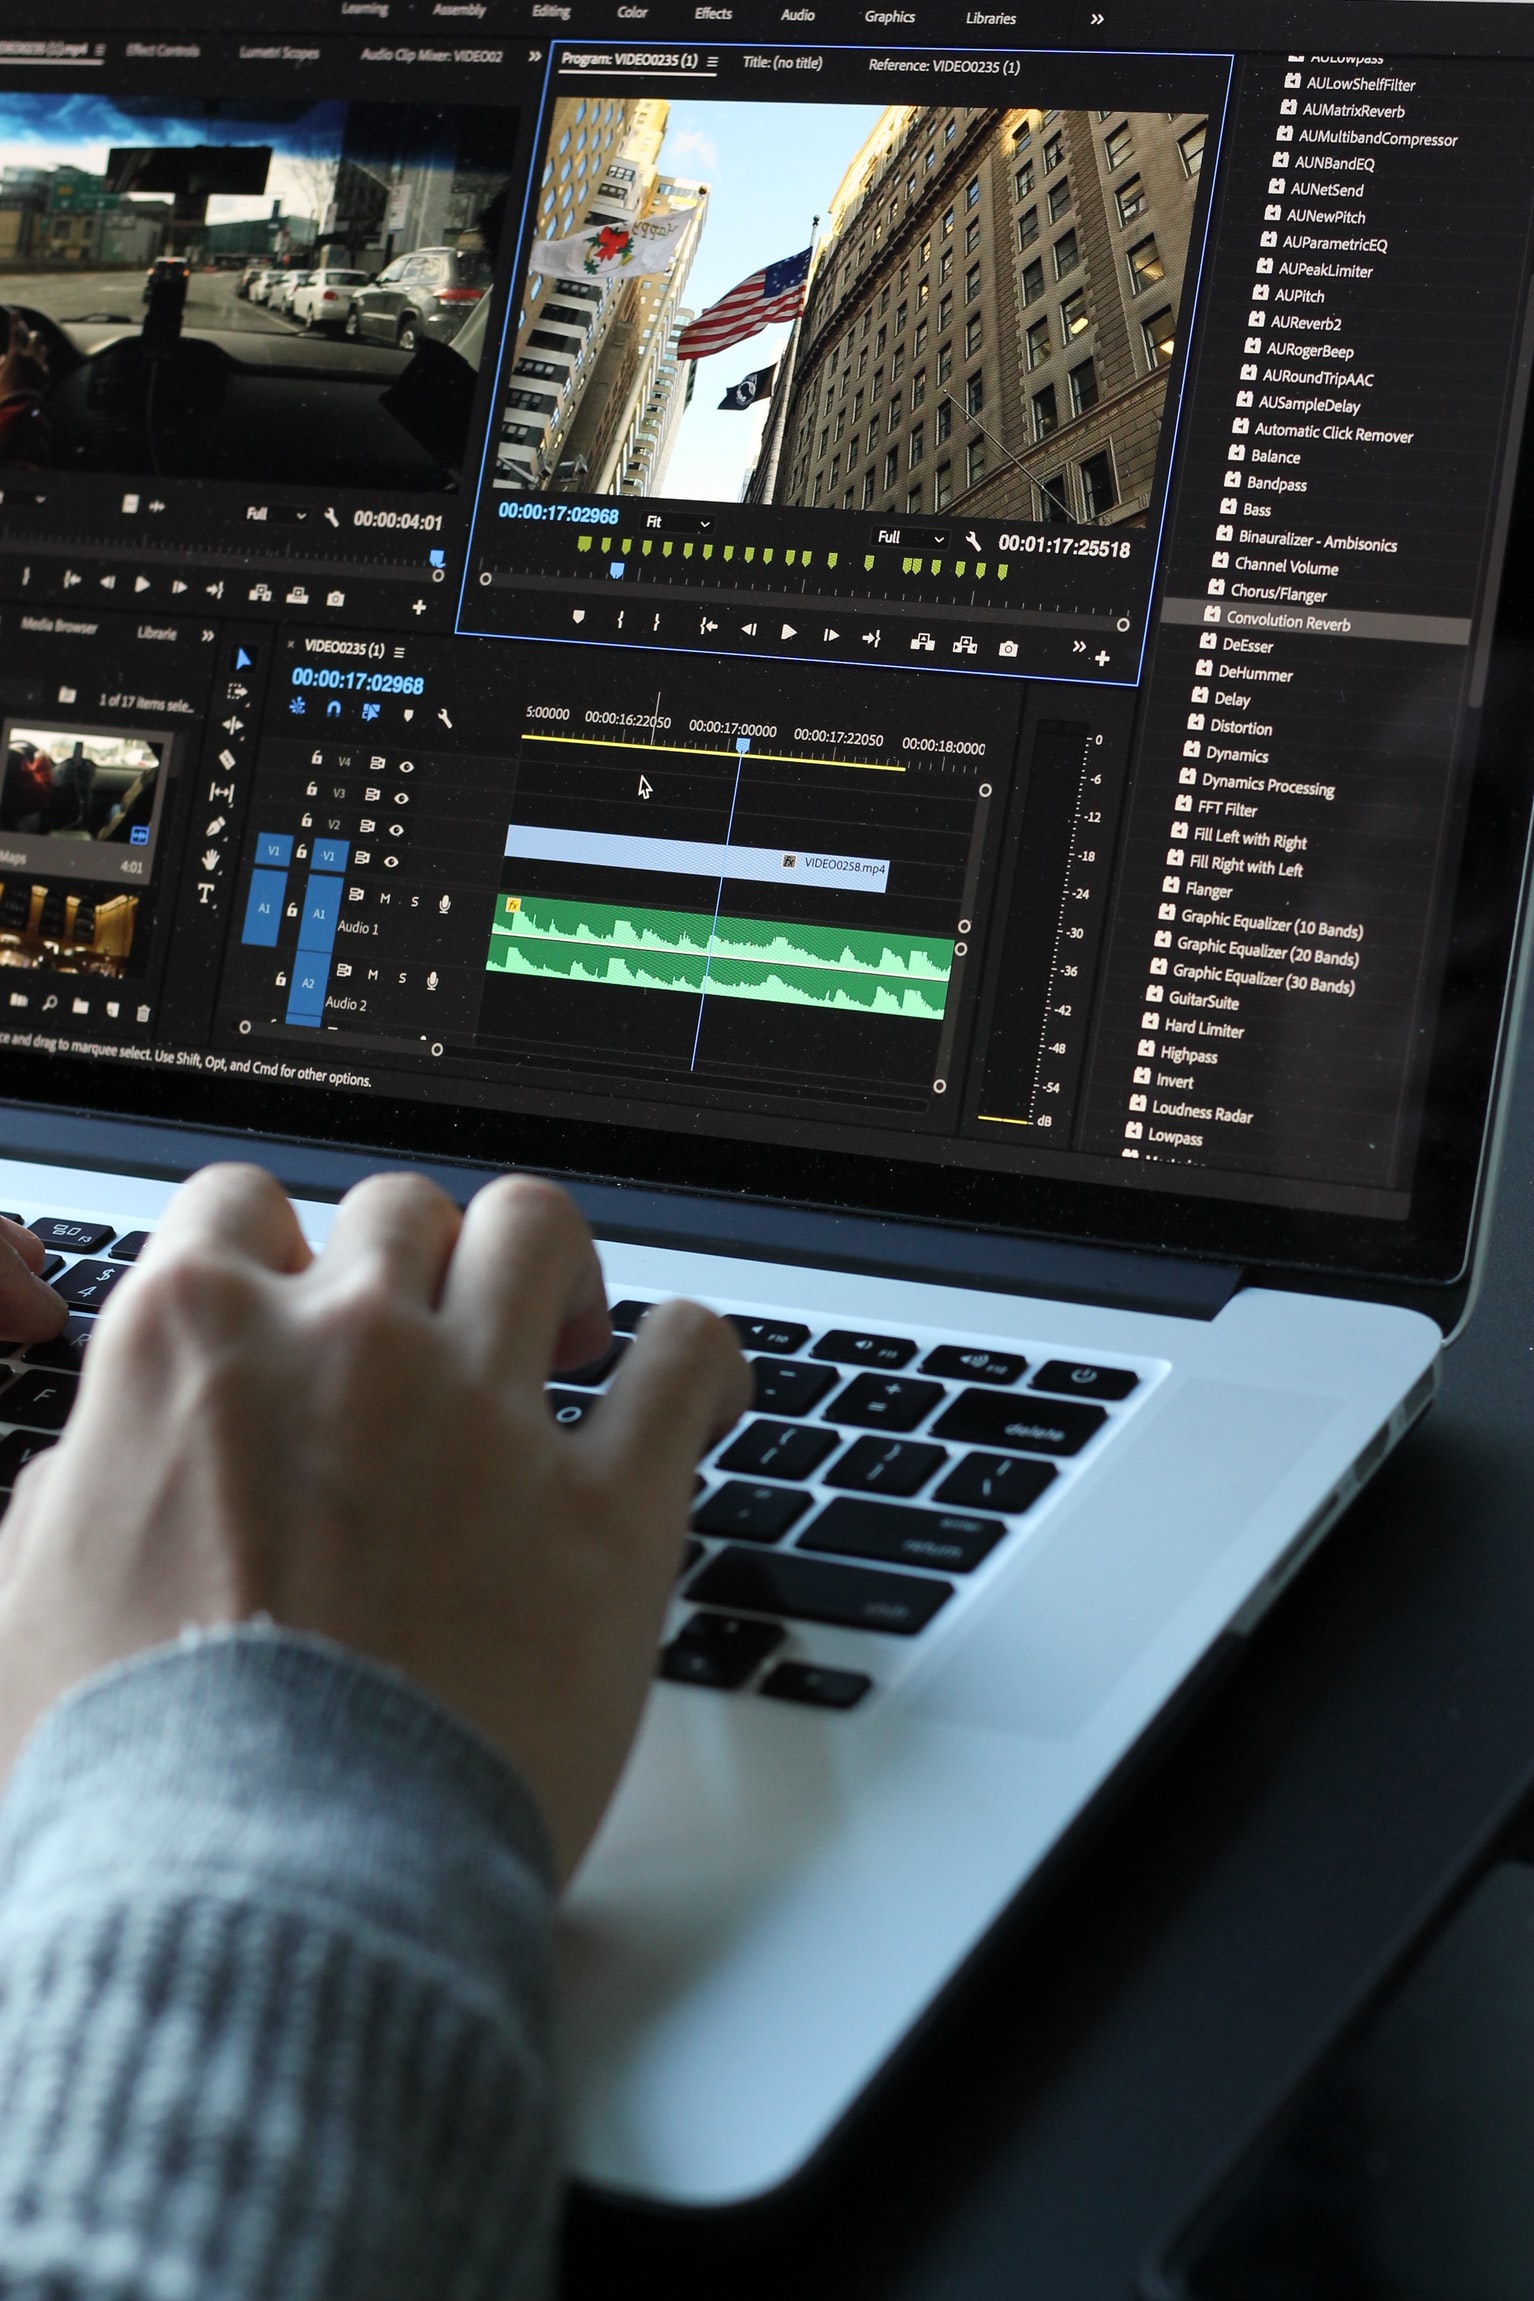 Explore the Art of Video Making and Editing through InVideo on your MacBook